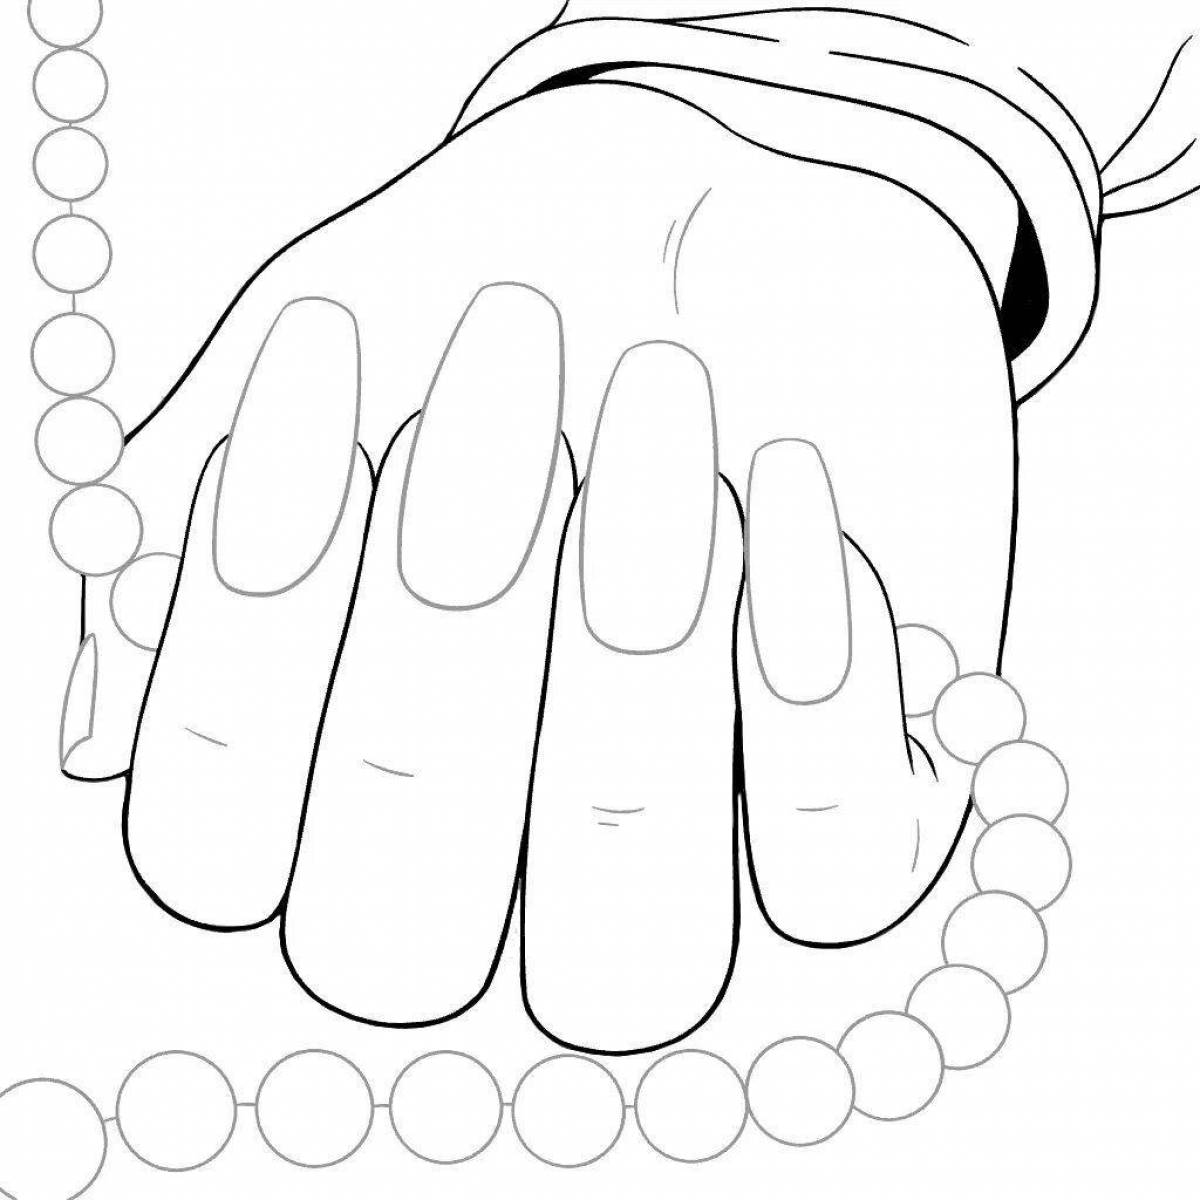 Unique long nails for girls coloring book